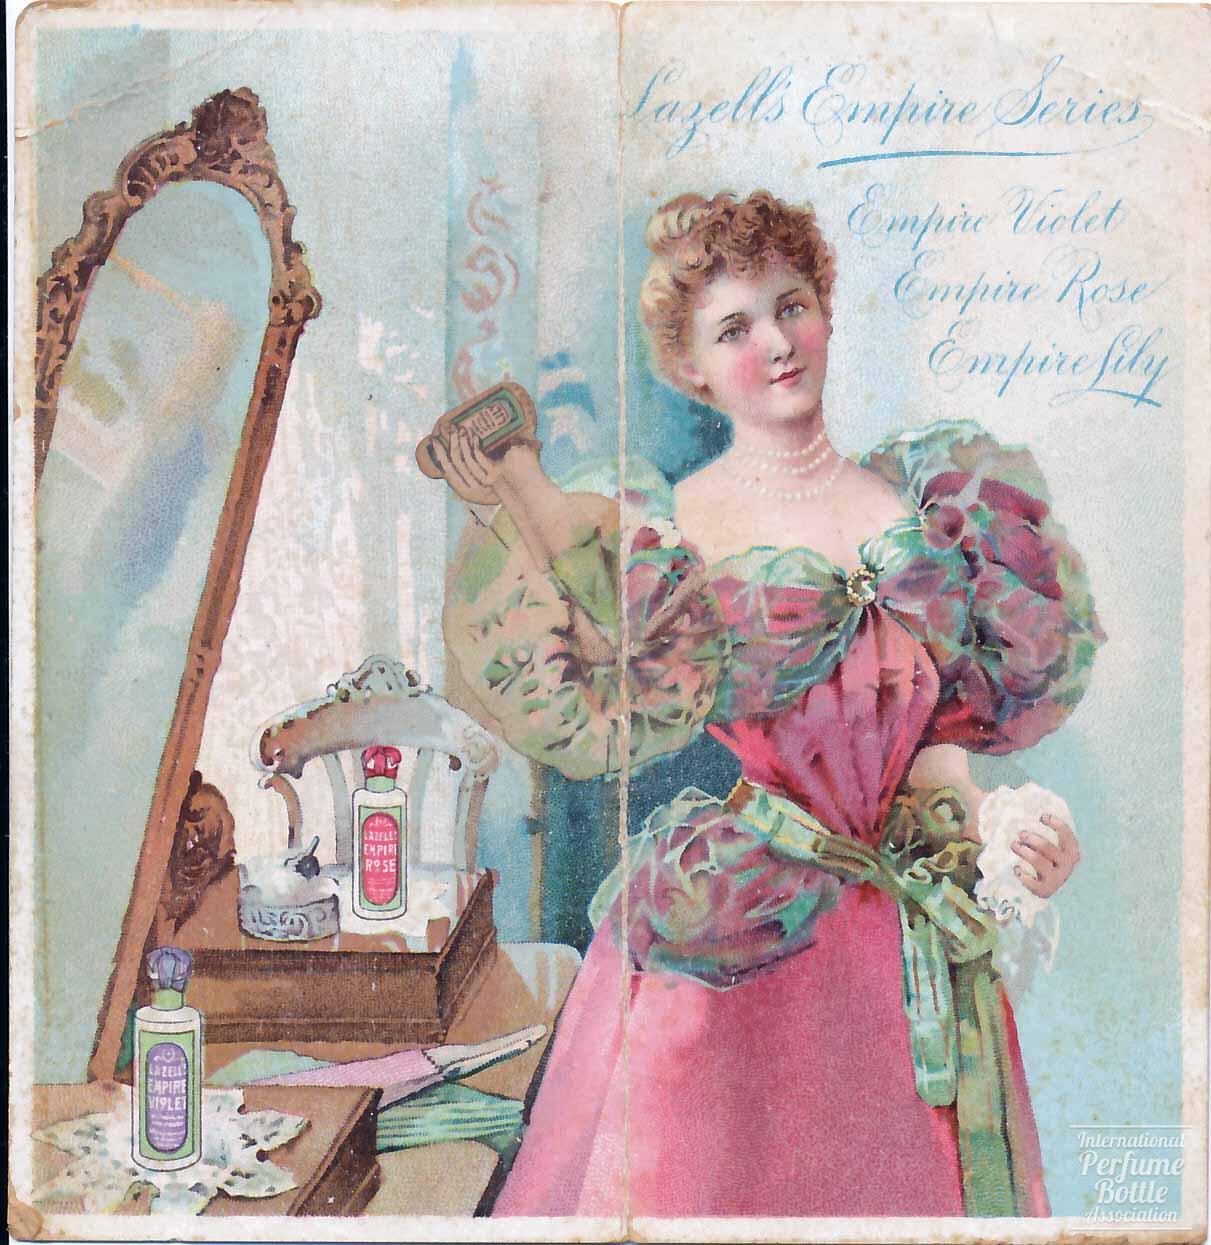 "Empire Series" Trade Card by Lazell With 1892 Calendar